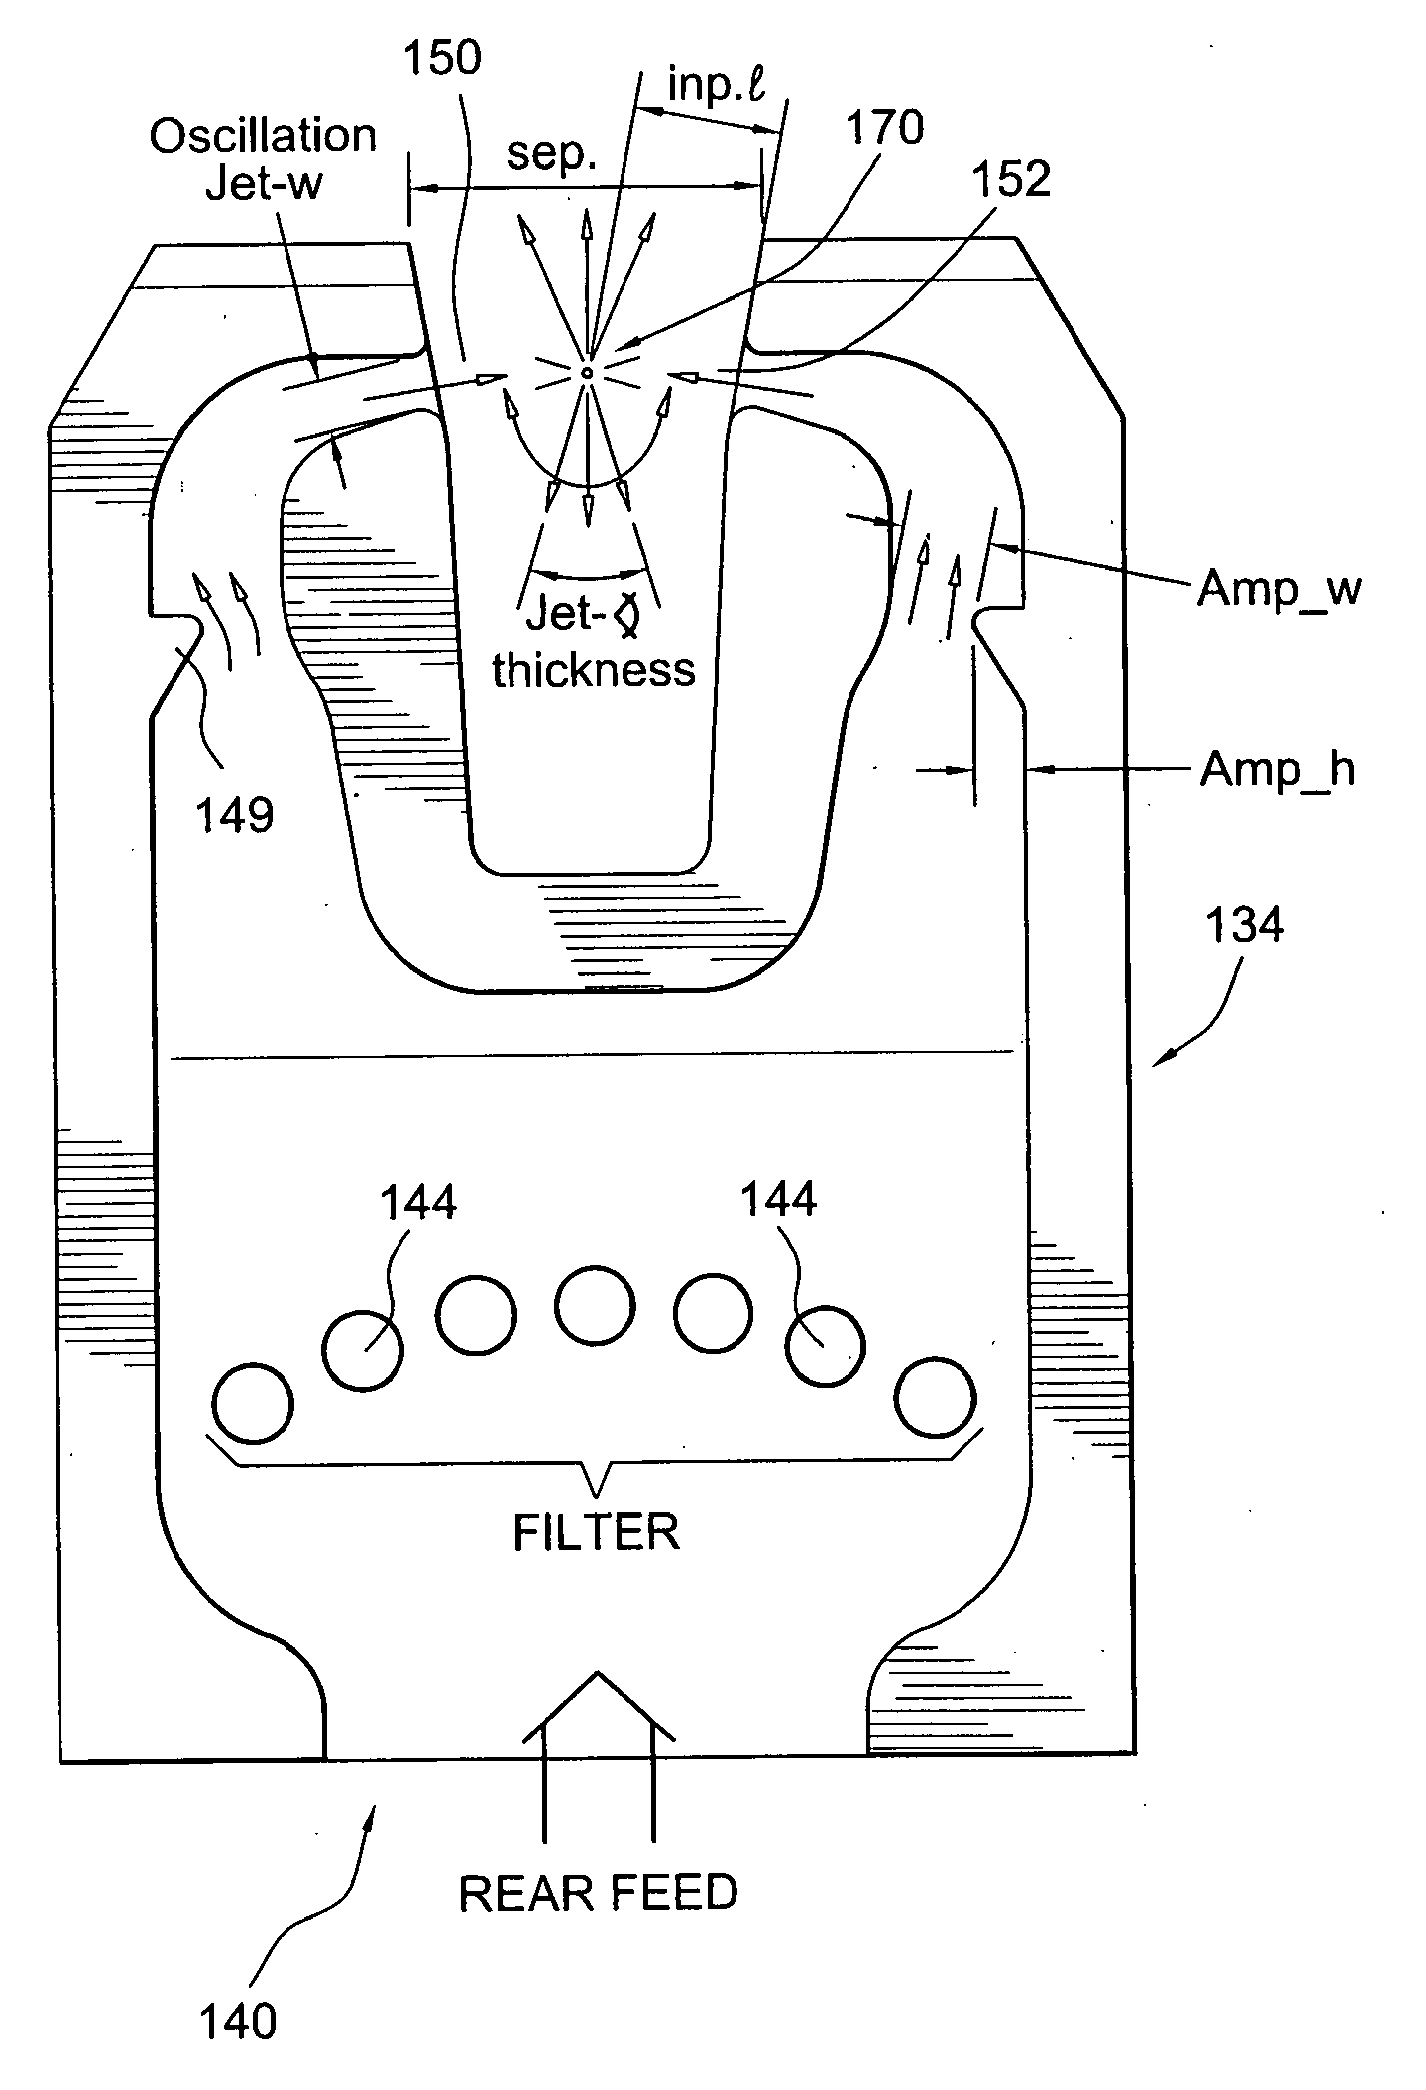 Full coverage fluidic oscillator with automated cleaning system and method